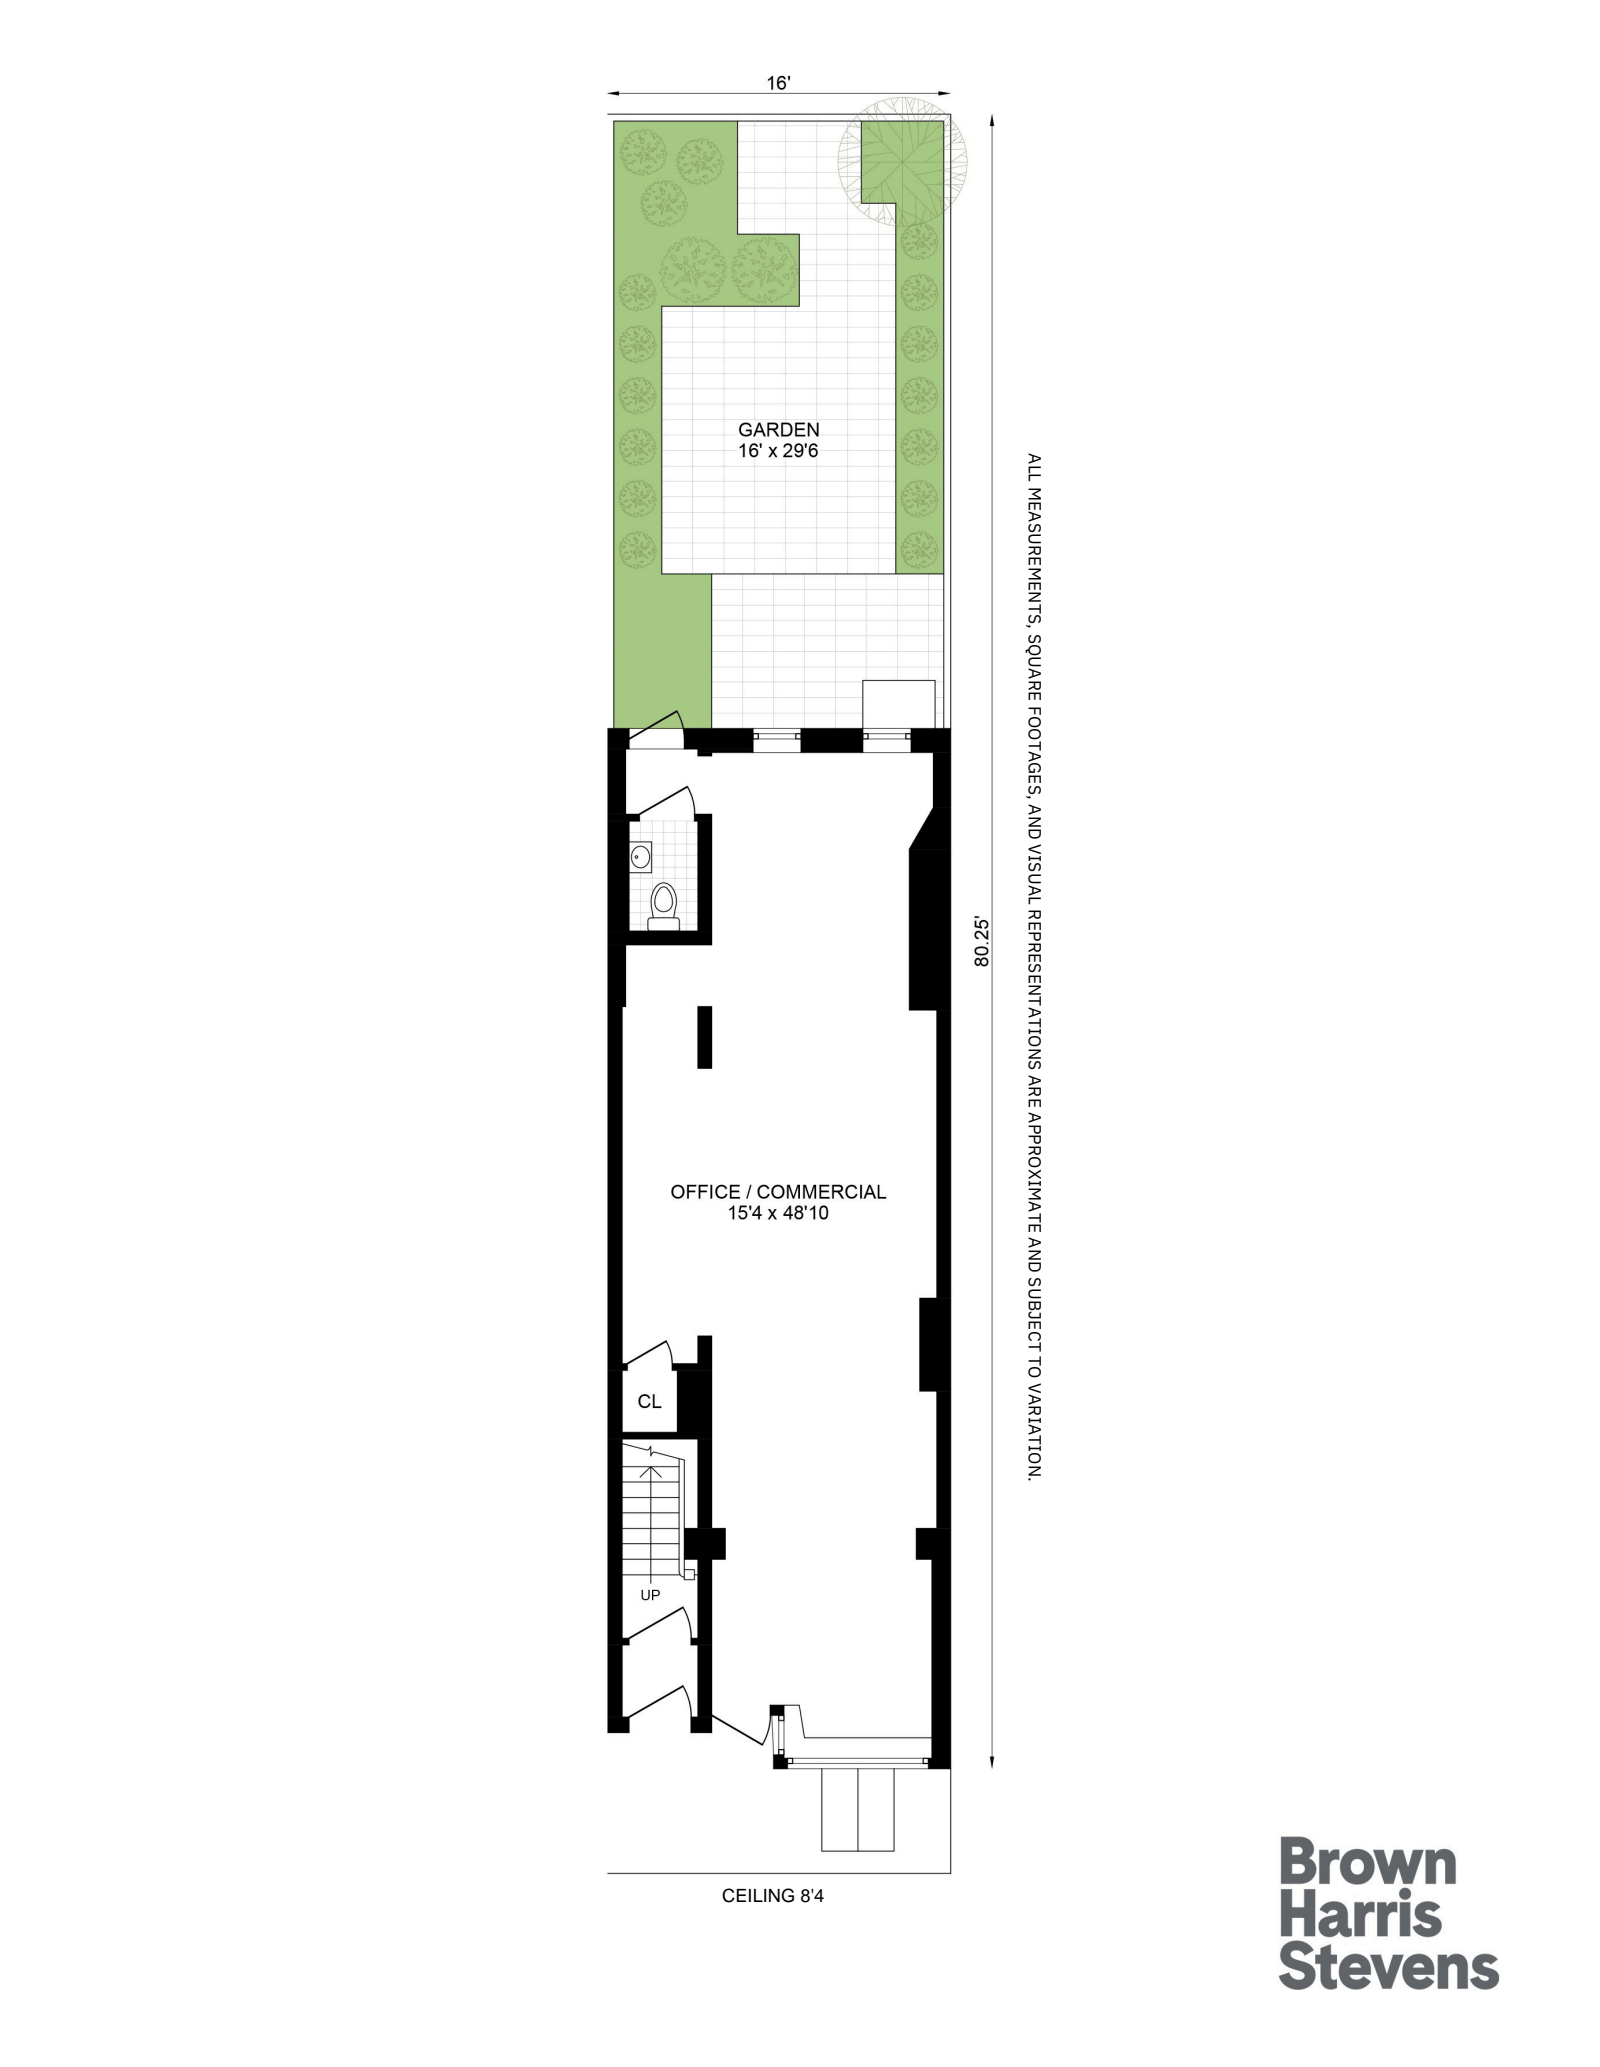 Floorplan for 1214 8th Avenue, STOREFRONT